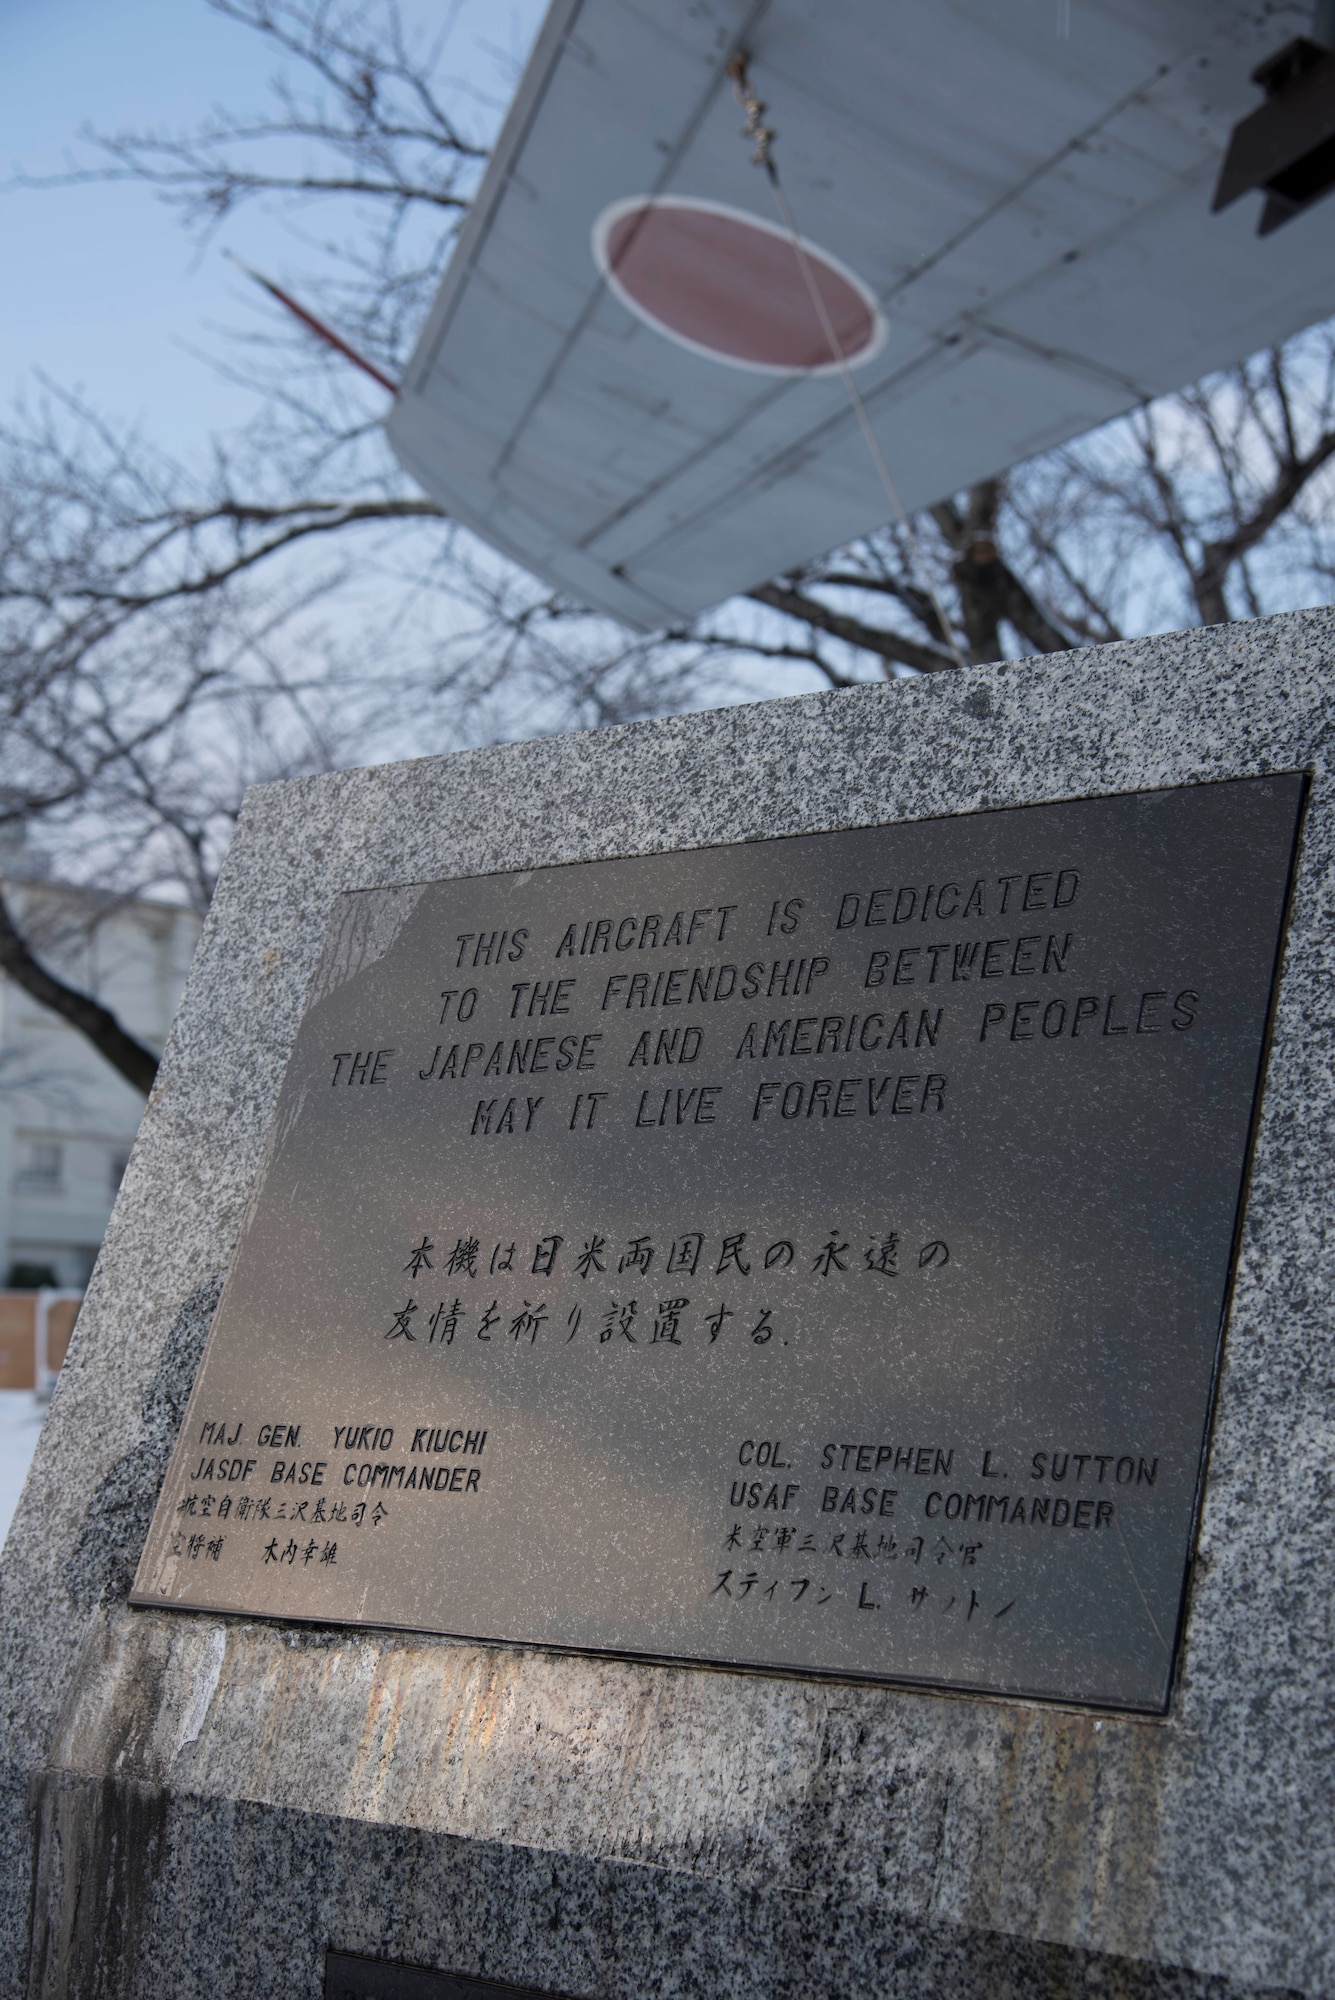 An F-86F Sabre dedication plaque sits in Risner Circle at Misawa Air Base, Japan, Dec. 18, 2018. After the first Combined Air Festival in 1980, the Japanese and American base commanders decided to use the F-86 as a symbol of the Japan-U.S. friendship. Service members from Hamamatsu Air Base, Japan, dissembled the aircraft and it arrived at Misawa AB on July 3, 1981, to be reassembled and displayed. Engraved on this plaque is the statement, “This aircraft is dedicated to the friendship between the Japanese and American peoples. May it live forever.” (U.S. Air Force photo)